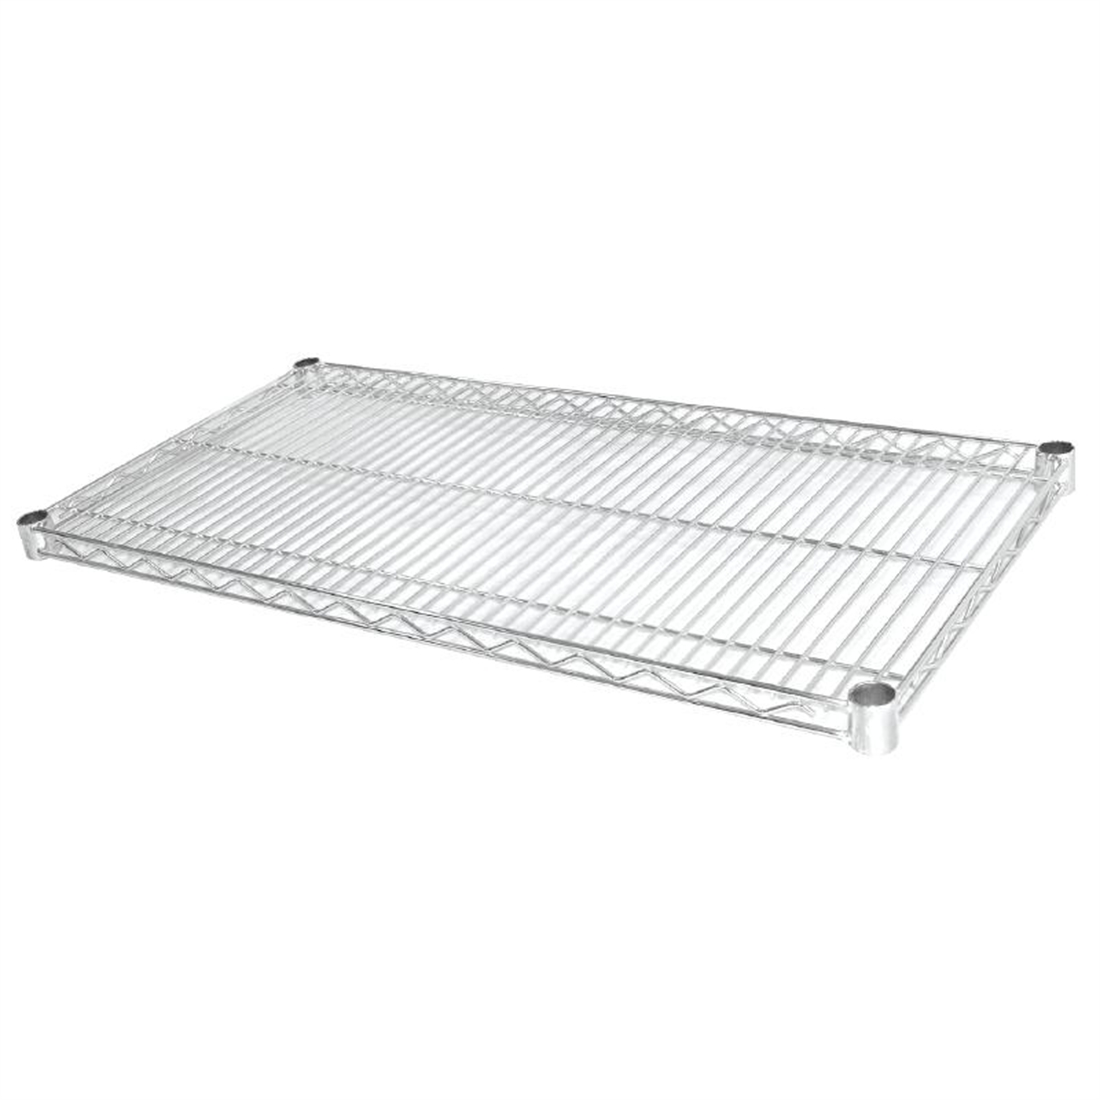 Vogue Chrome Wire Shelves 1220x610mm Pack of 2